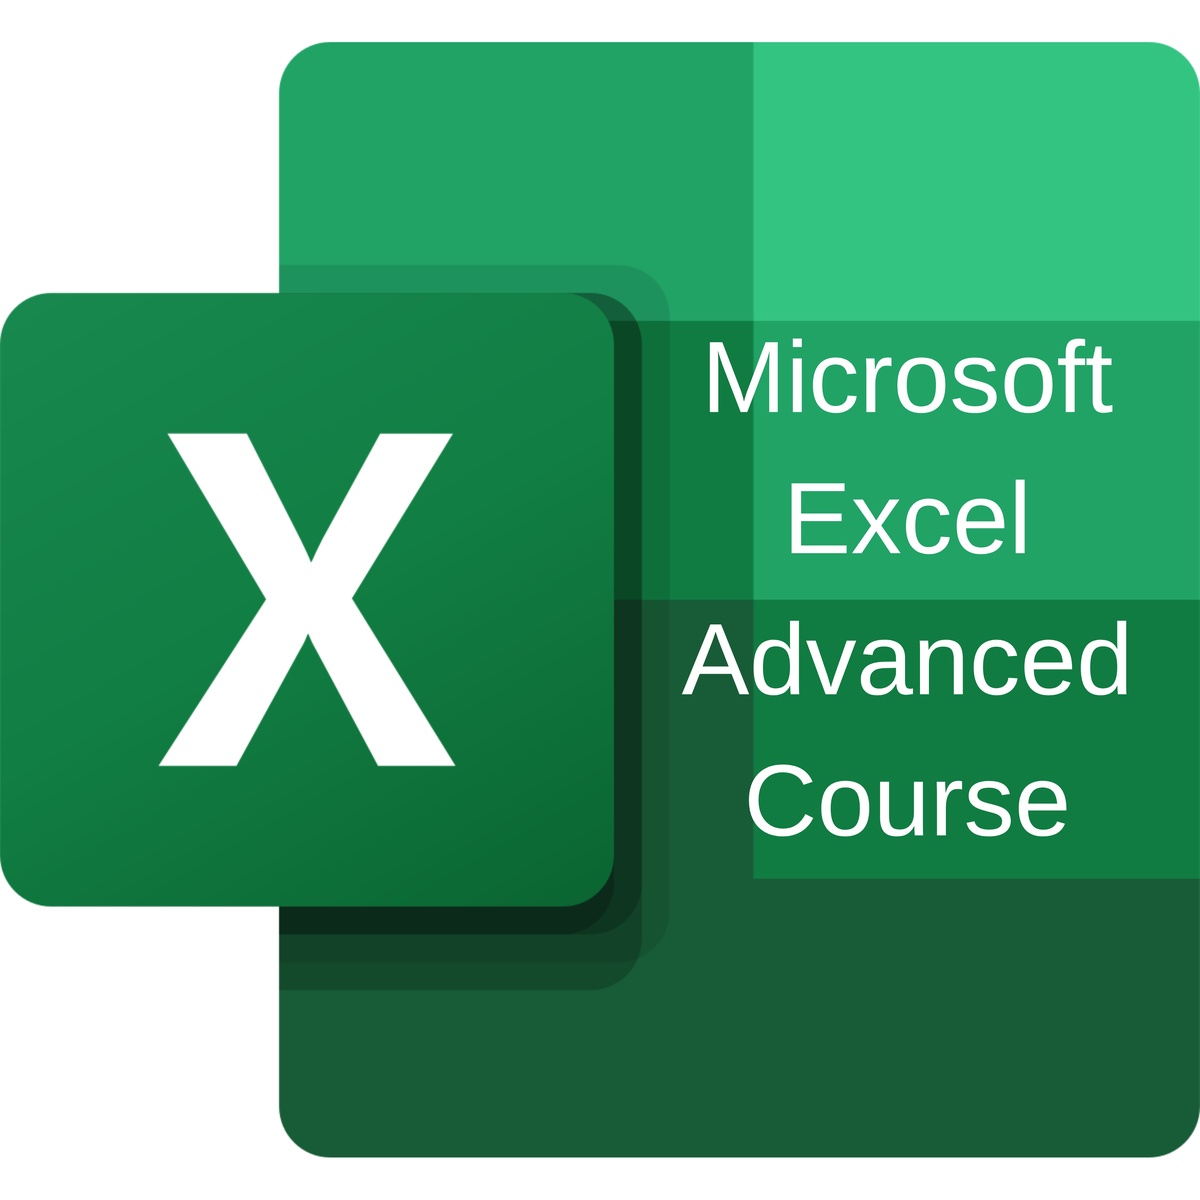 Unleash Your Excel Wizardry Down Under with Logitrain's Advanced Microsoft Excel Training Course